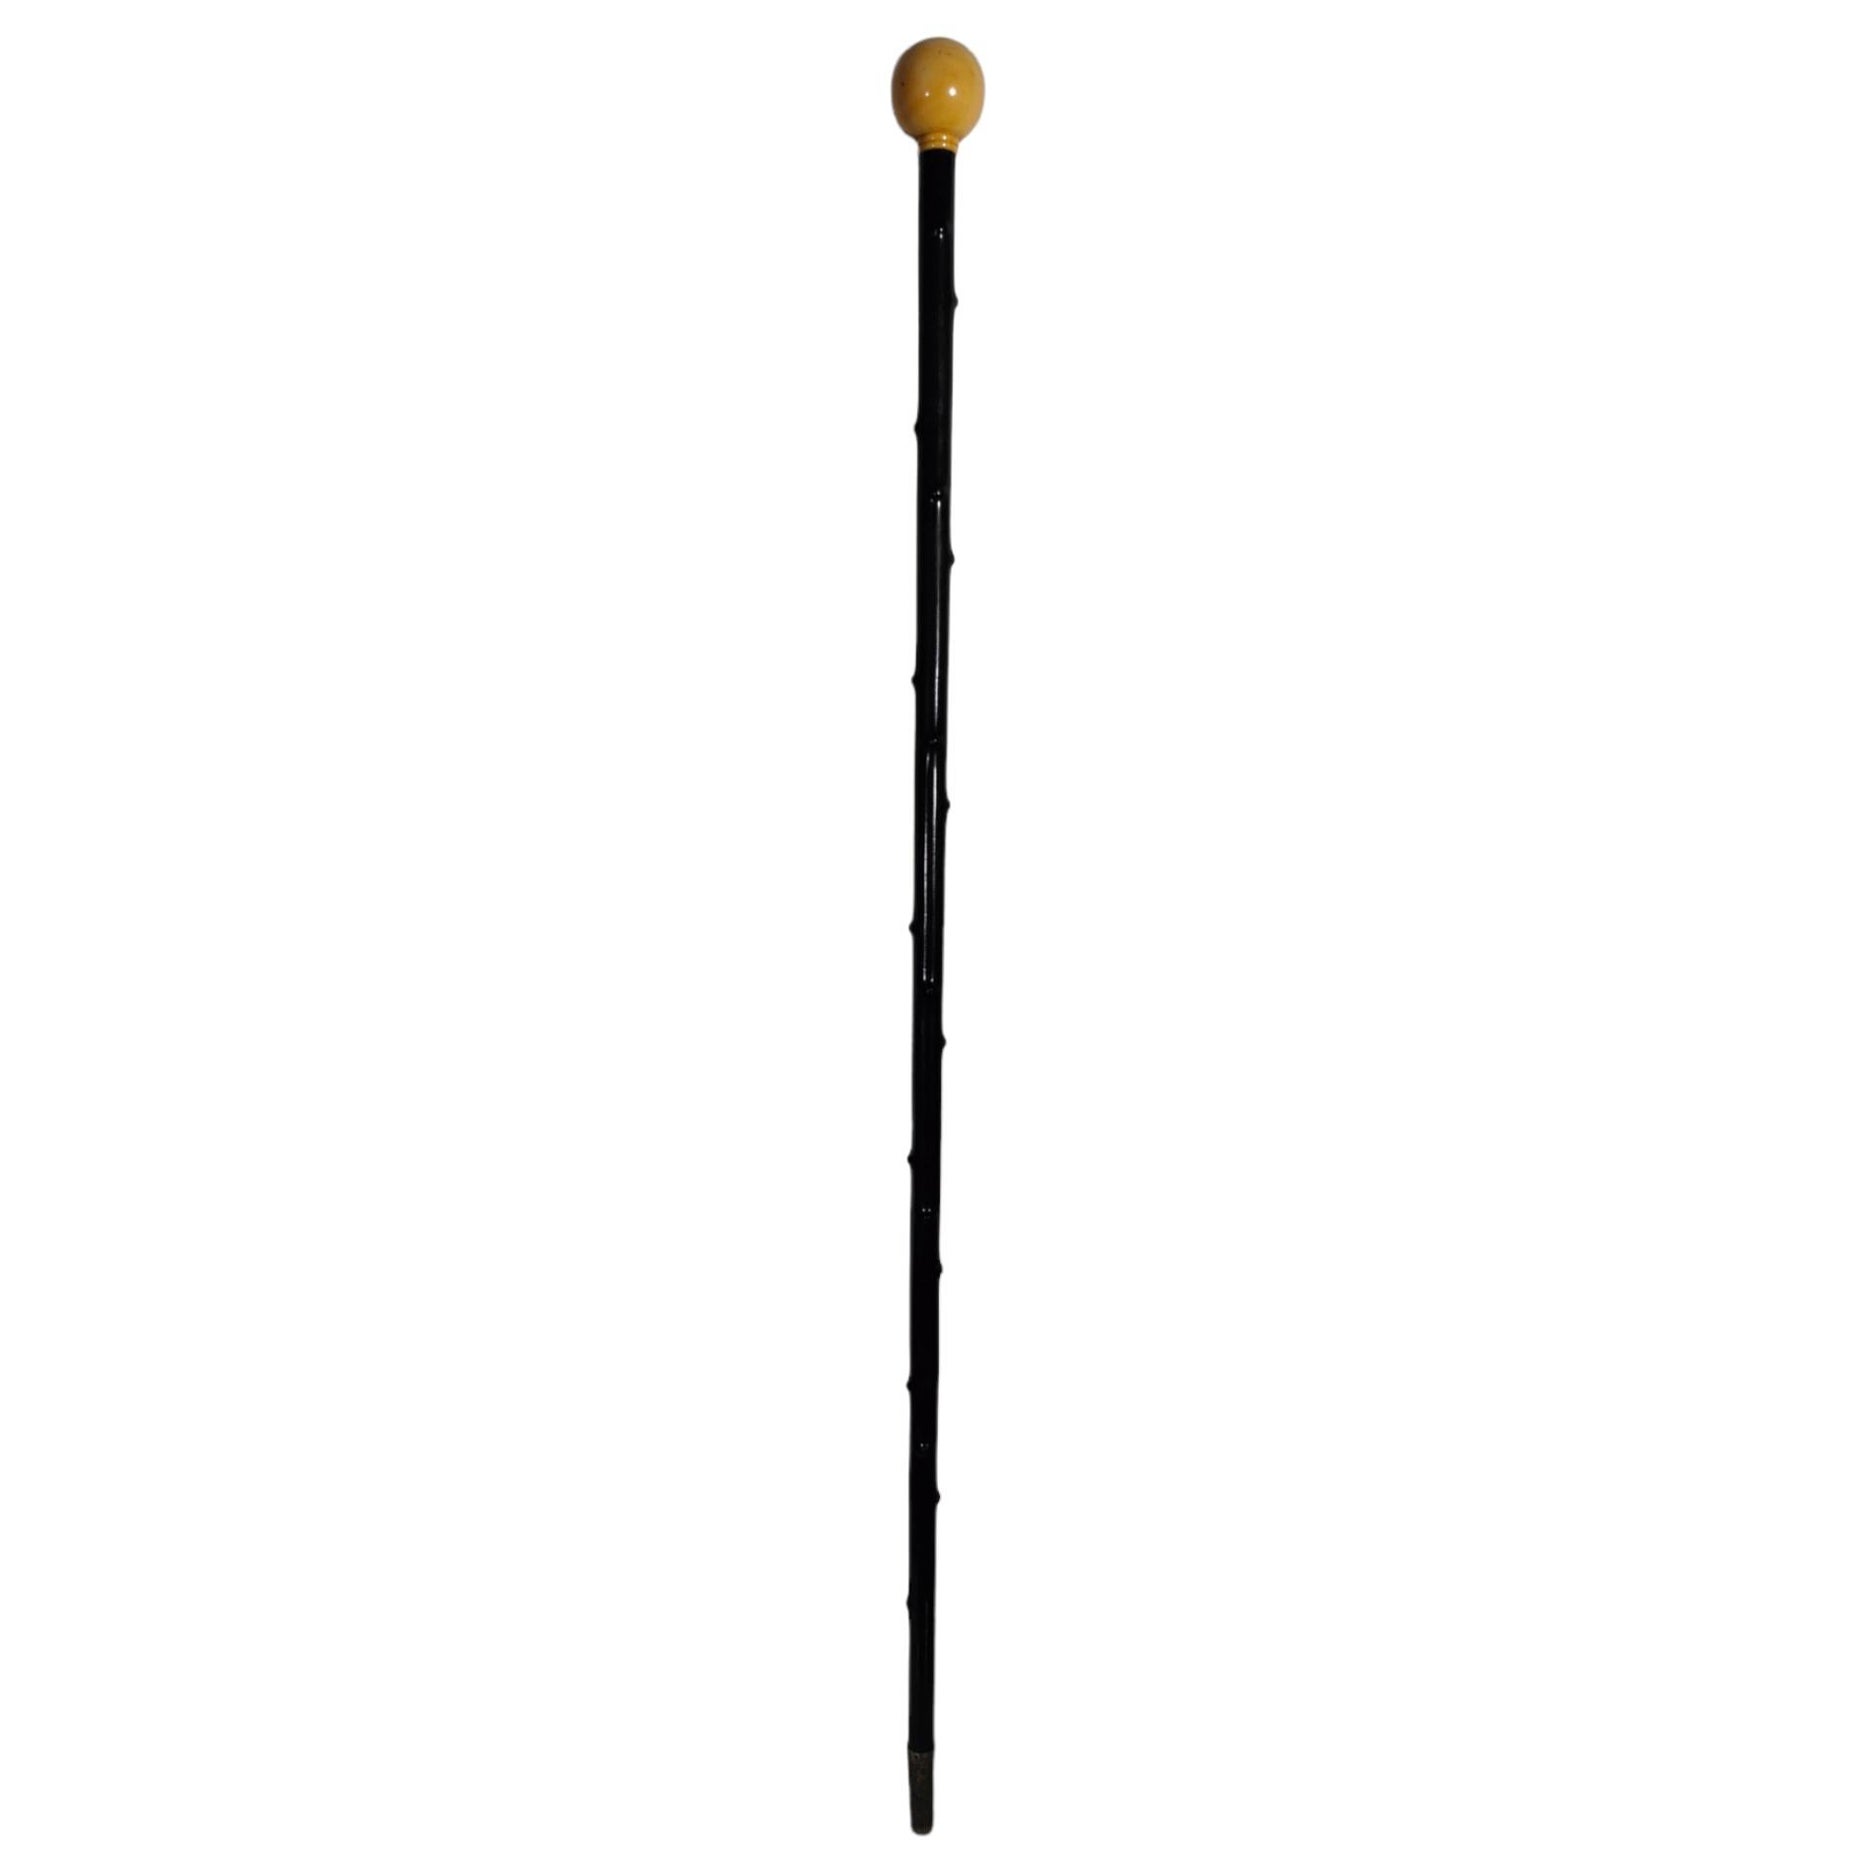 Old Cane From The XIX Century